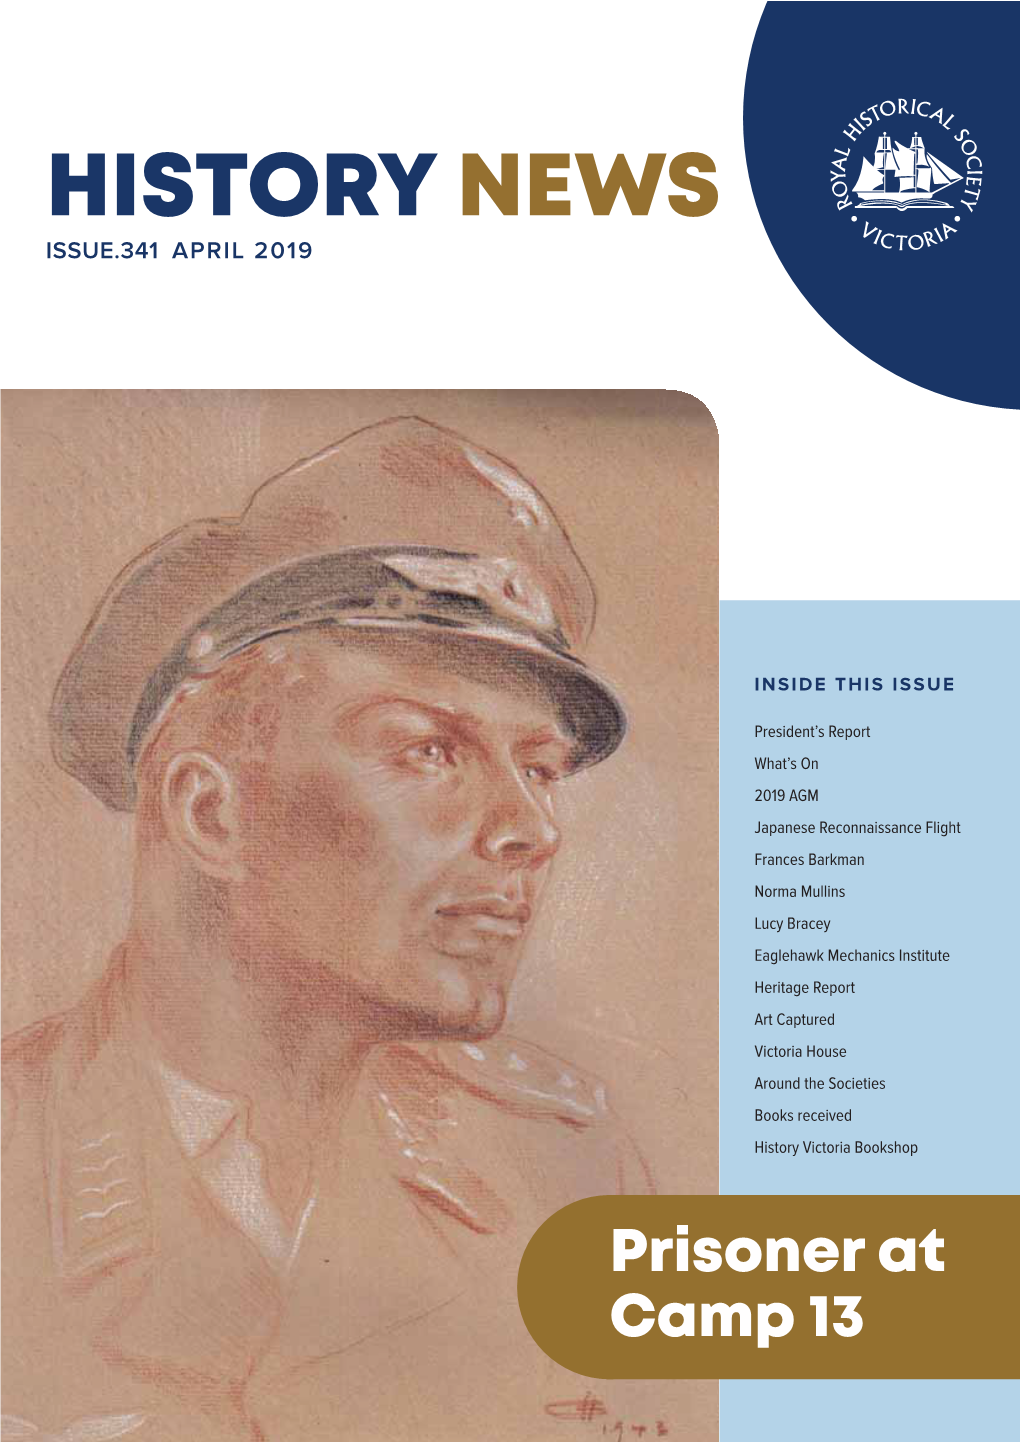 History News Issue.341 April 2019